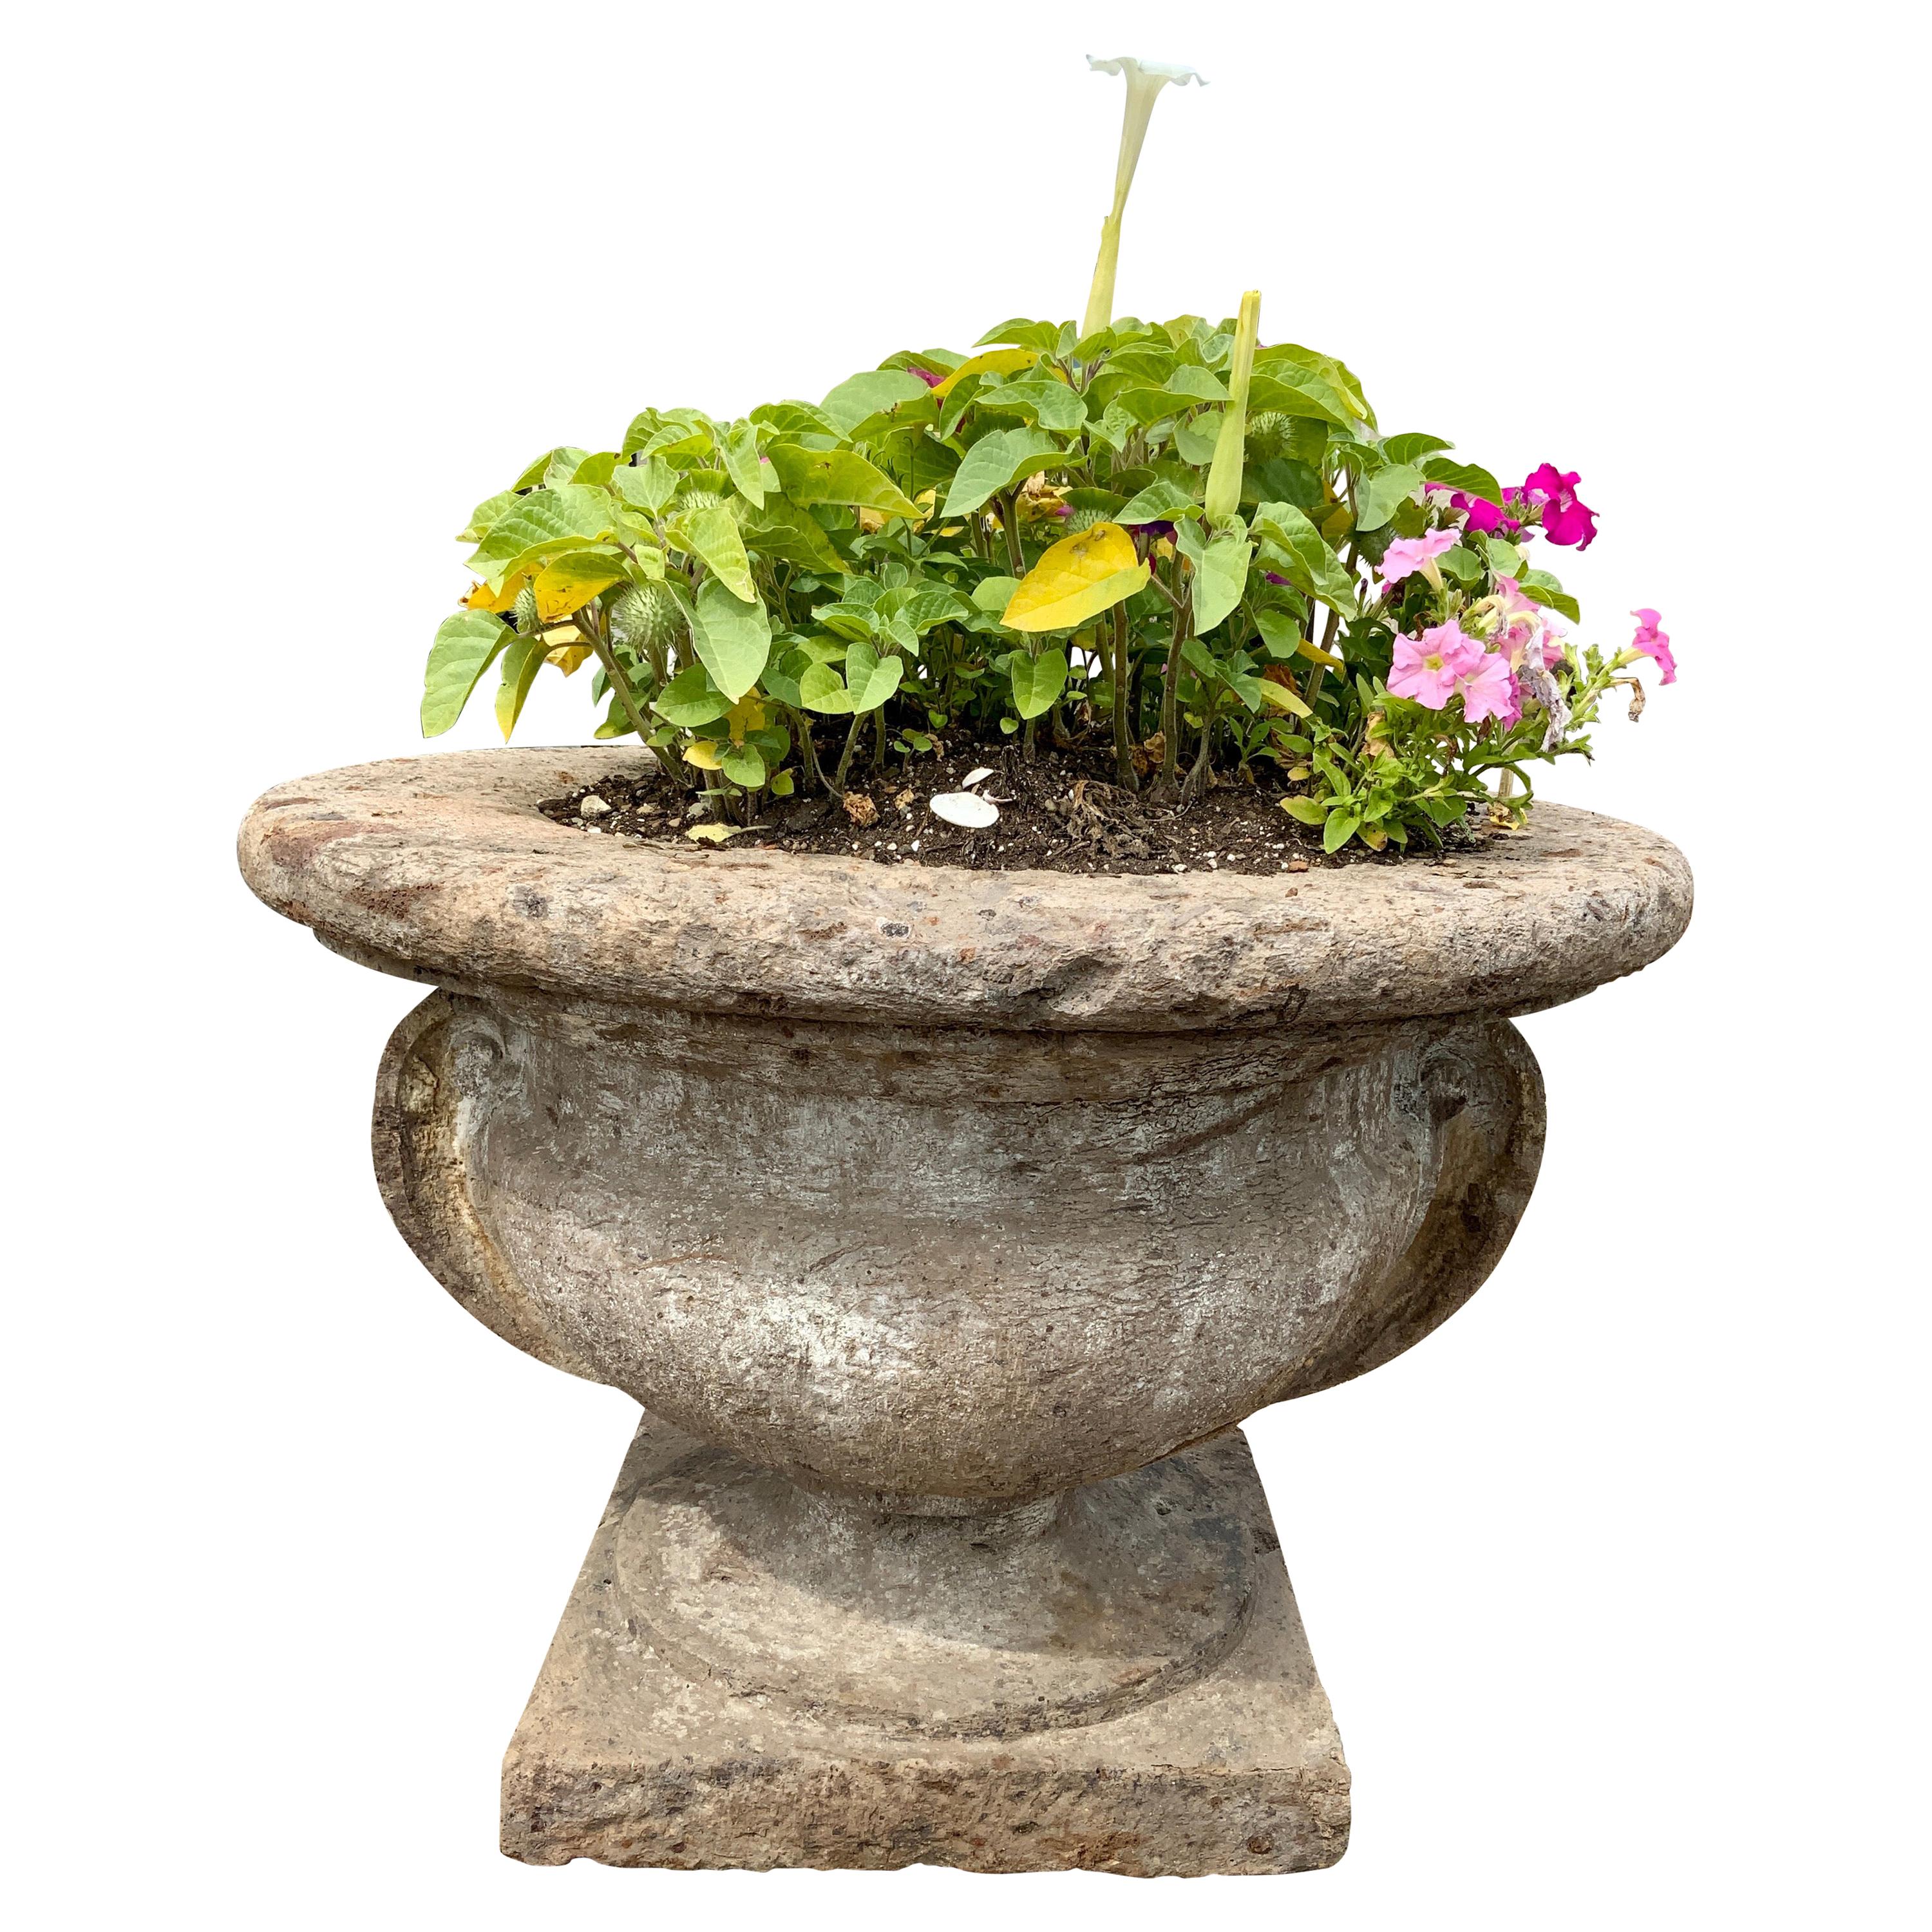 Mid-19th Century Limestone Planter from France